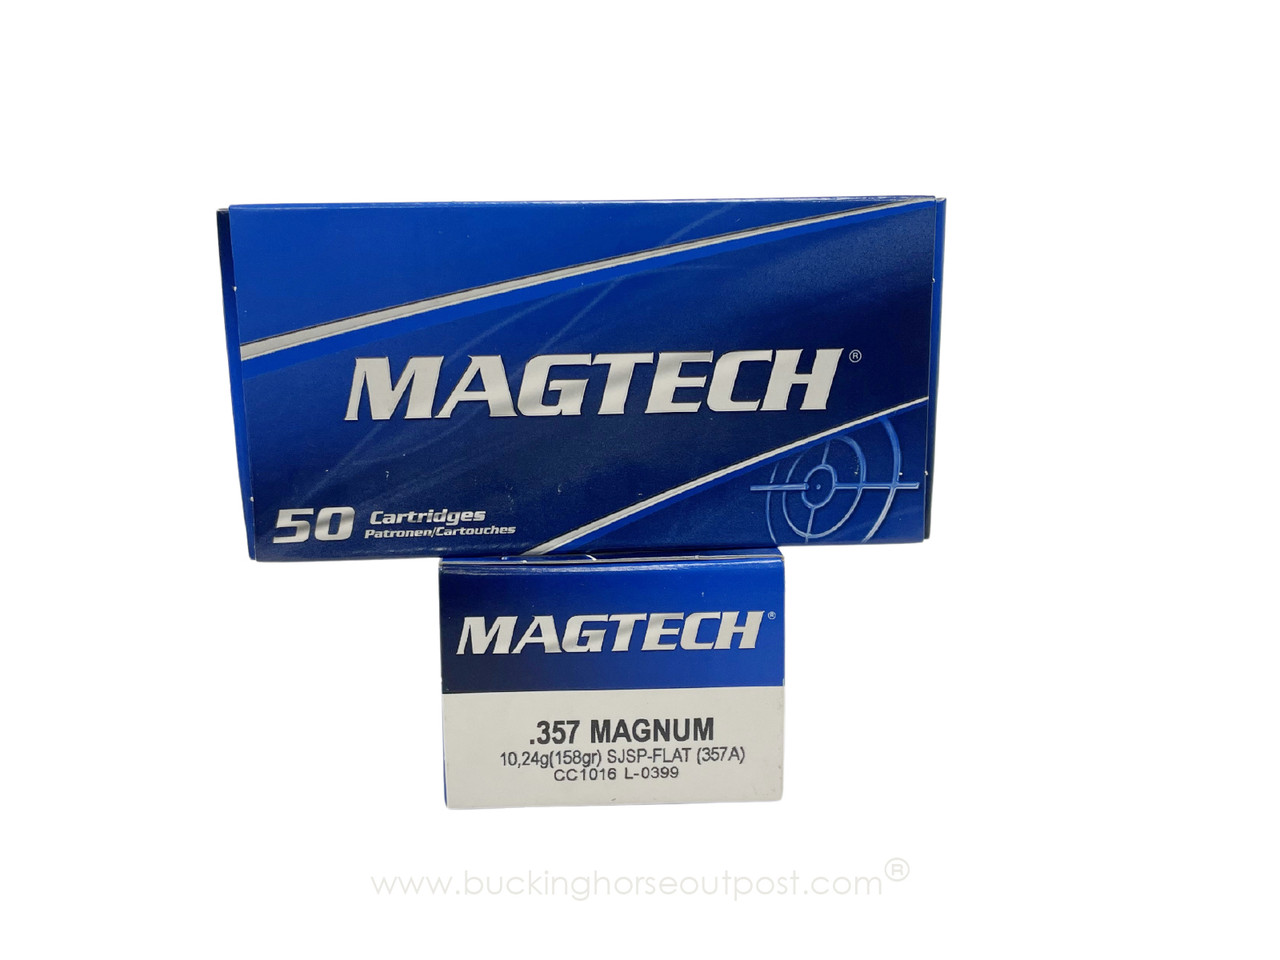 Magtech .357 Magnum 158 Grain Semi-Jacketed Soft Point 50rds Per Box (357A) - FREE SHIPPING ON ORDERS OVER $175